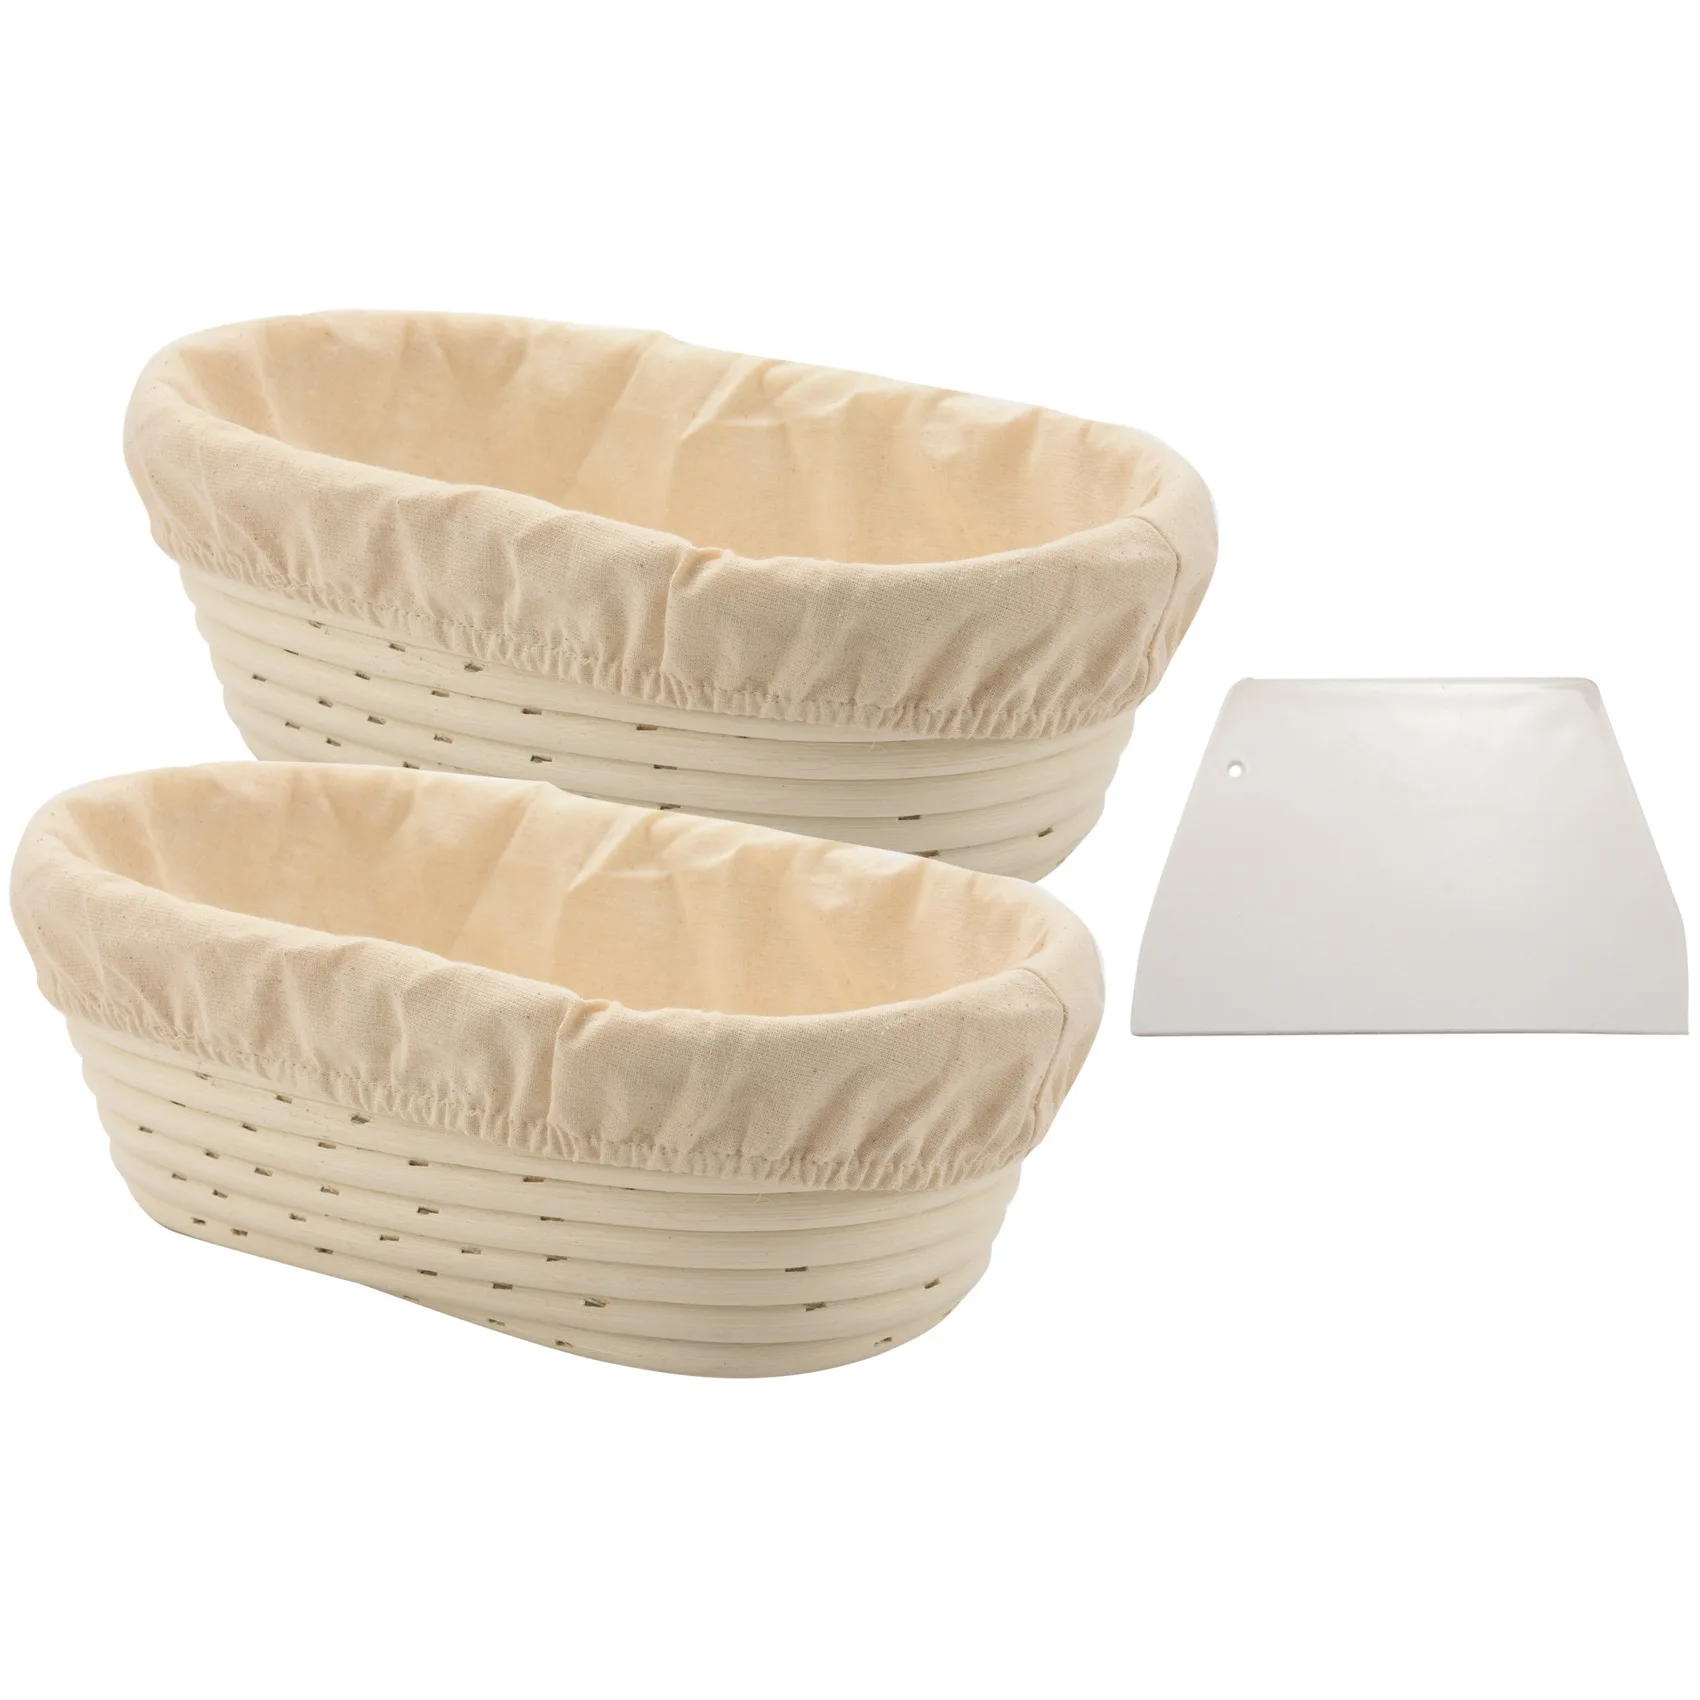 

2 Packs 10 Inch Oval Shaped Bread Proofing Basket - Baking Dough Bowl Gifts for Bakers Proving Baskets for Sourdough Bread Slash